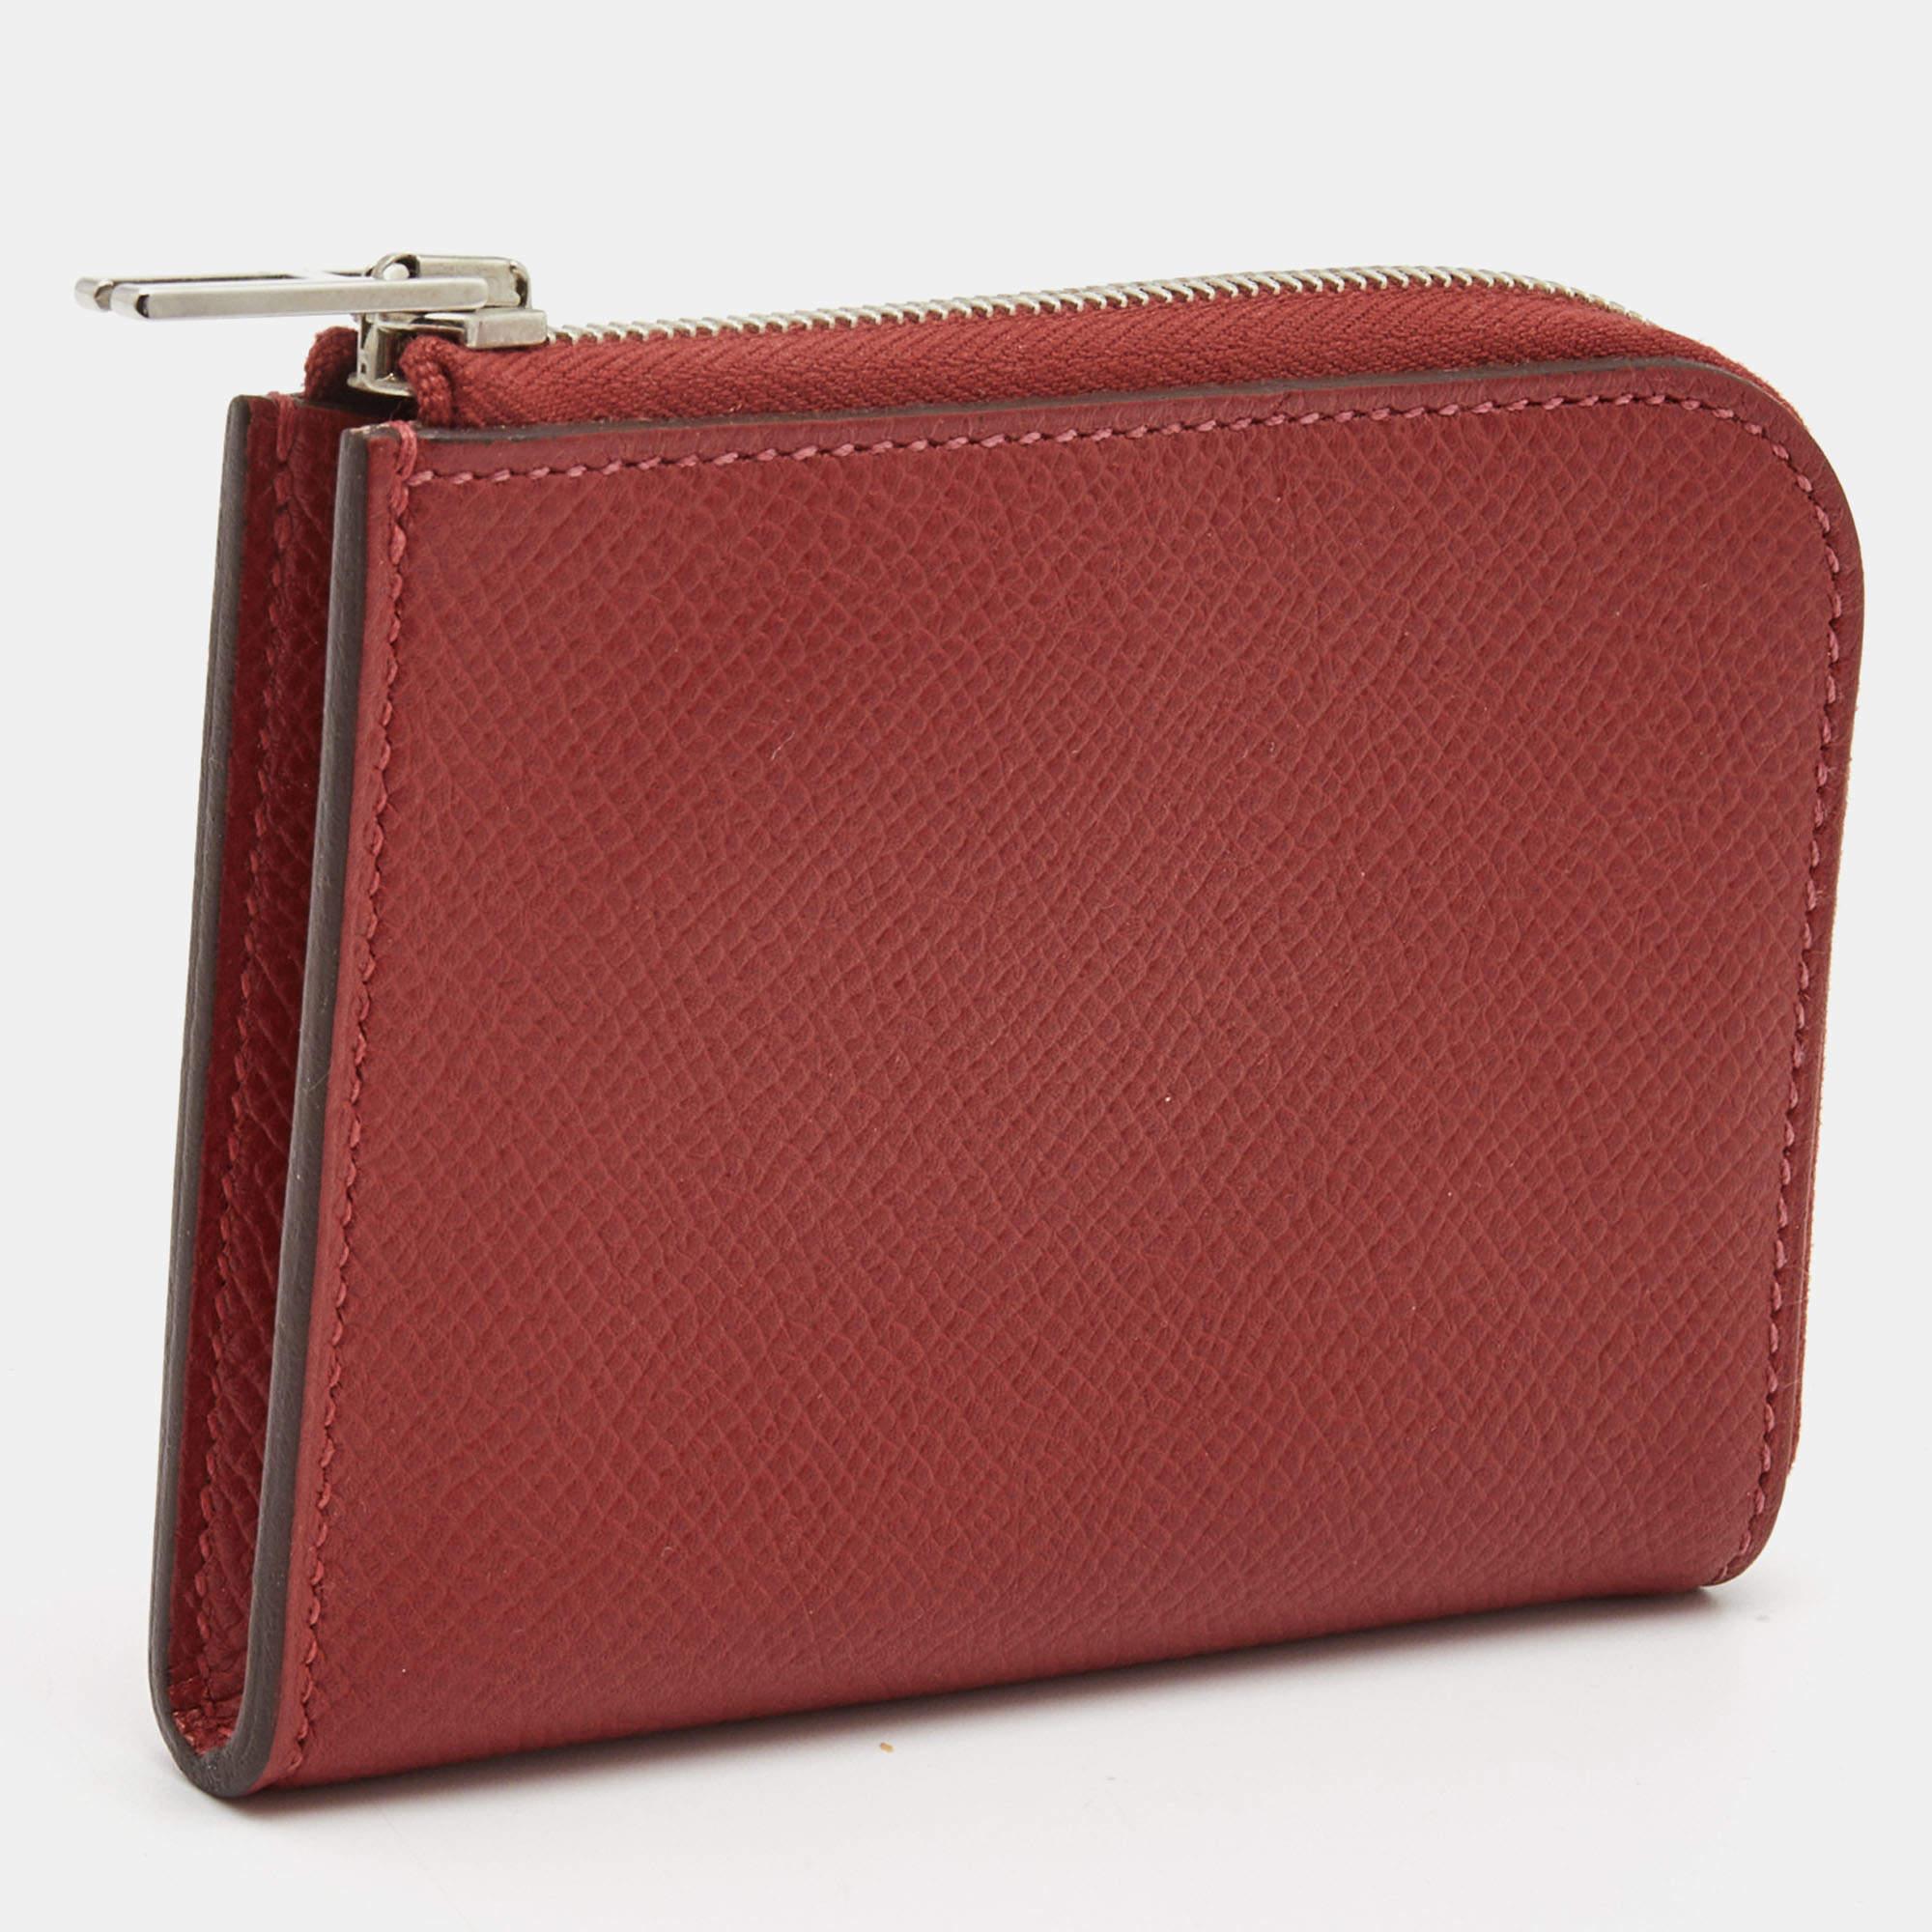 This Hermes wallet is a luxurious accessory that will prove to be super functional. It is made using durable materials on the exterior and unveils a well-organized interior.

